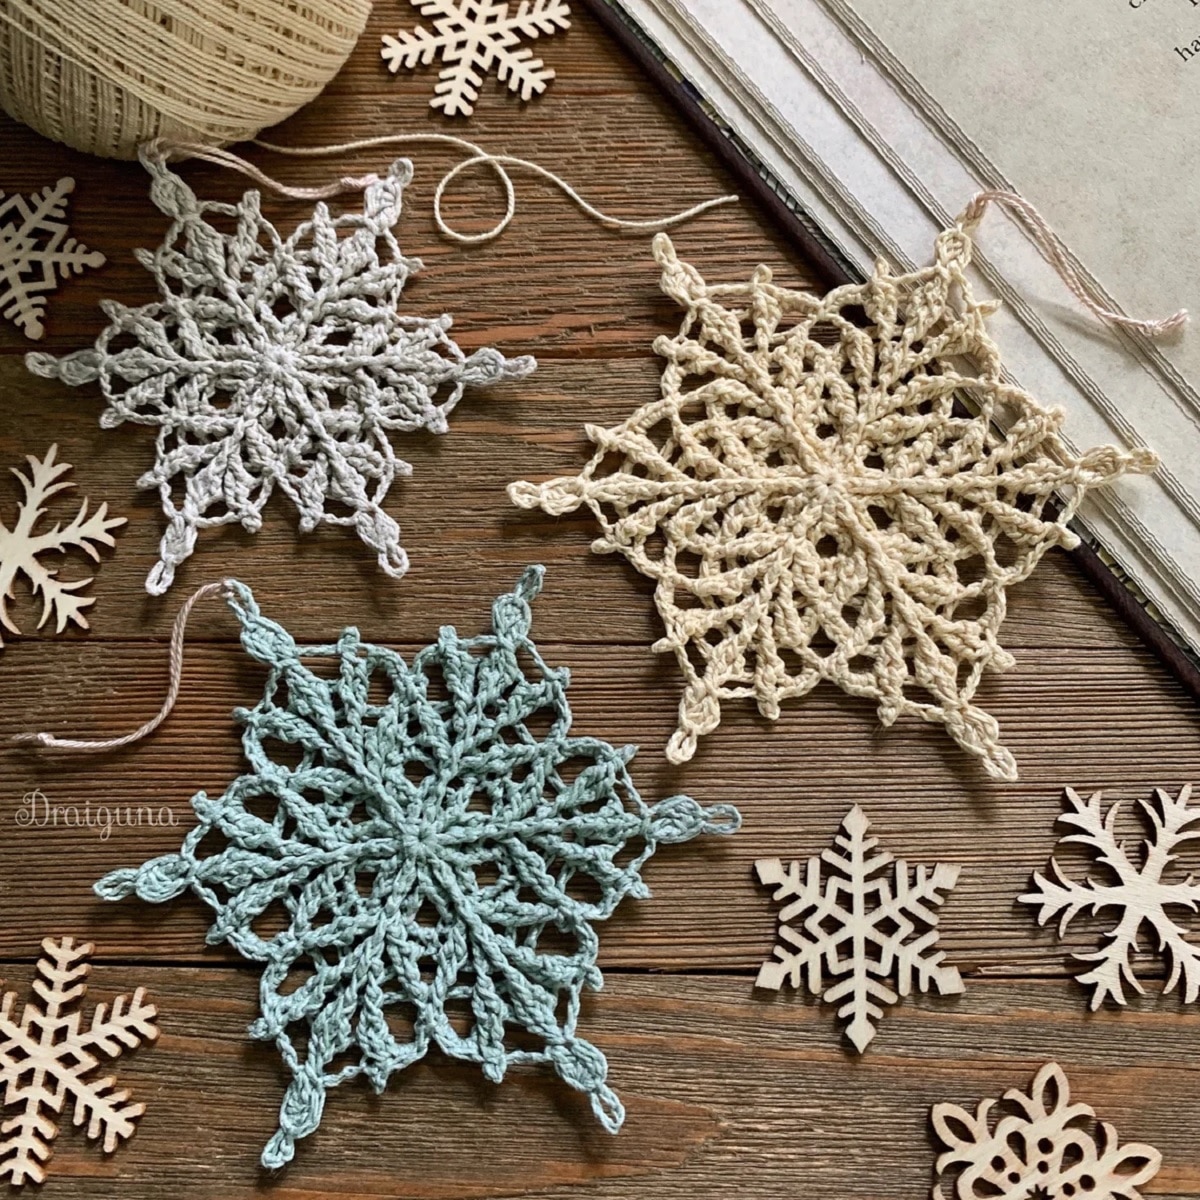 A blue, cream, and gray crochet snowflake on a wooden floor next to smaller white snowflakes.